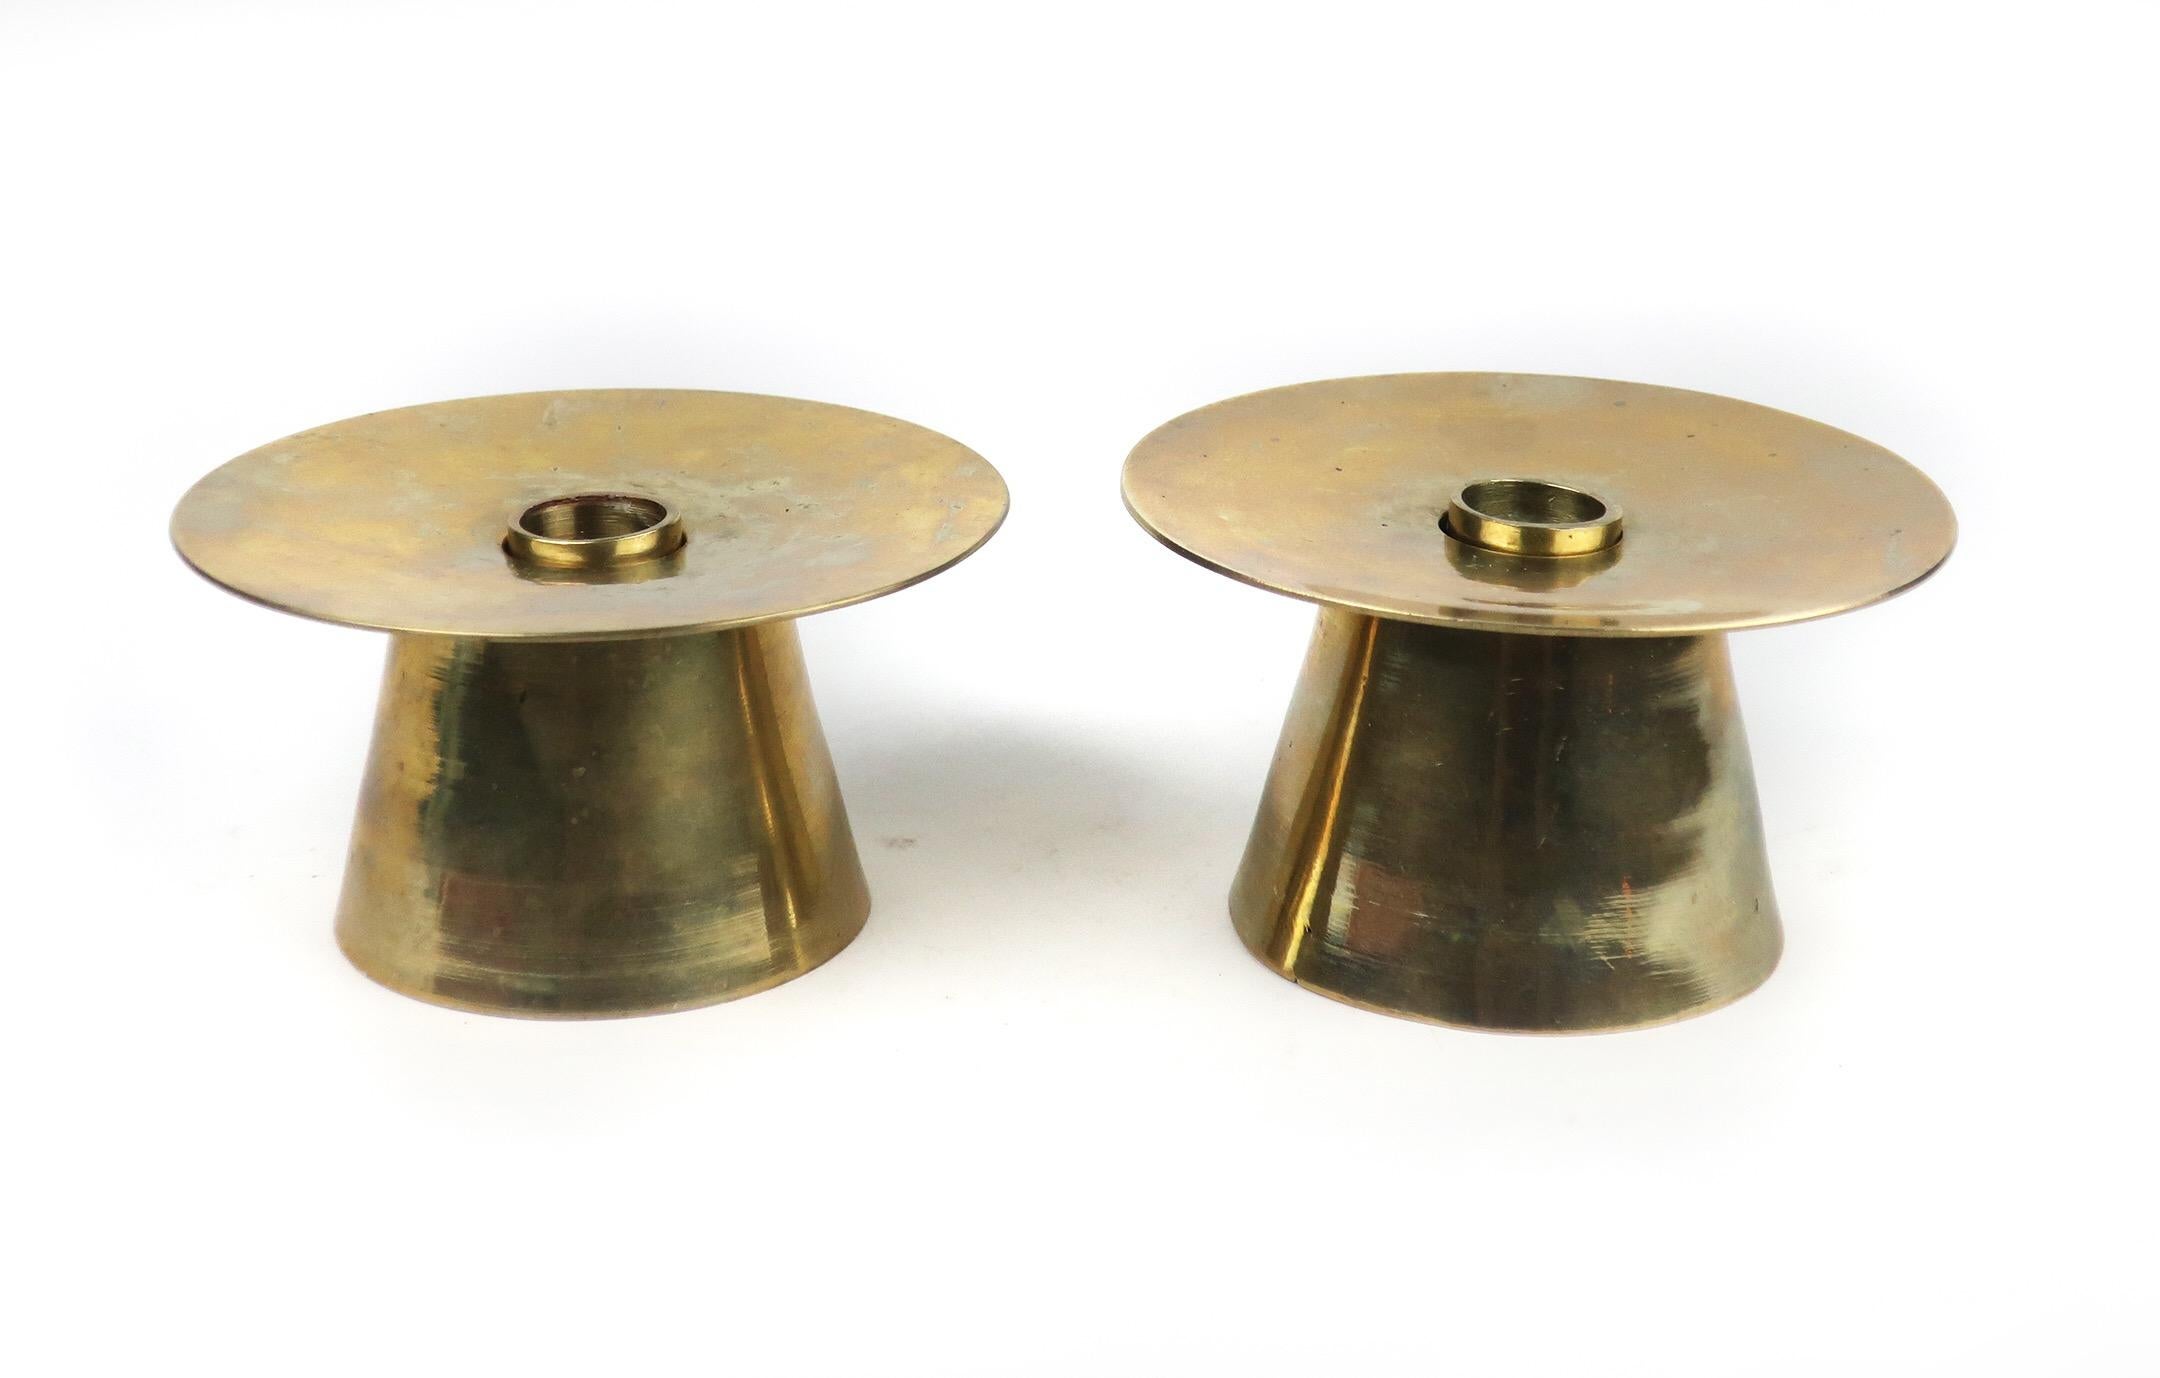 A pair of lovely midcentury or Danish modern brass candleholders with tapered cylindrical bases and wide plate top to catch dripping wax. Each has a removable insert for using with multiple sized candles.

In excellent condition. Designer and